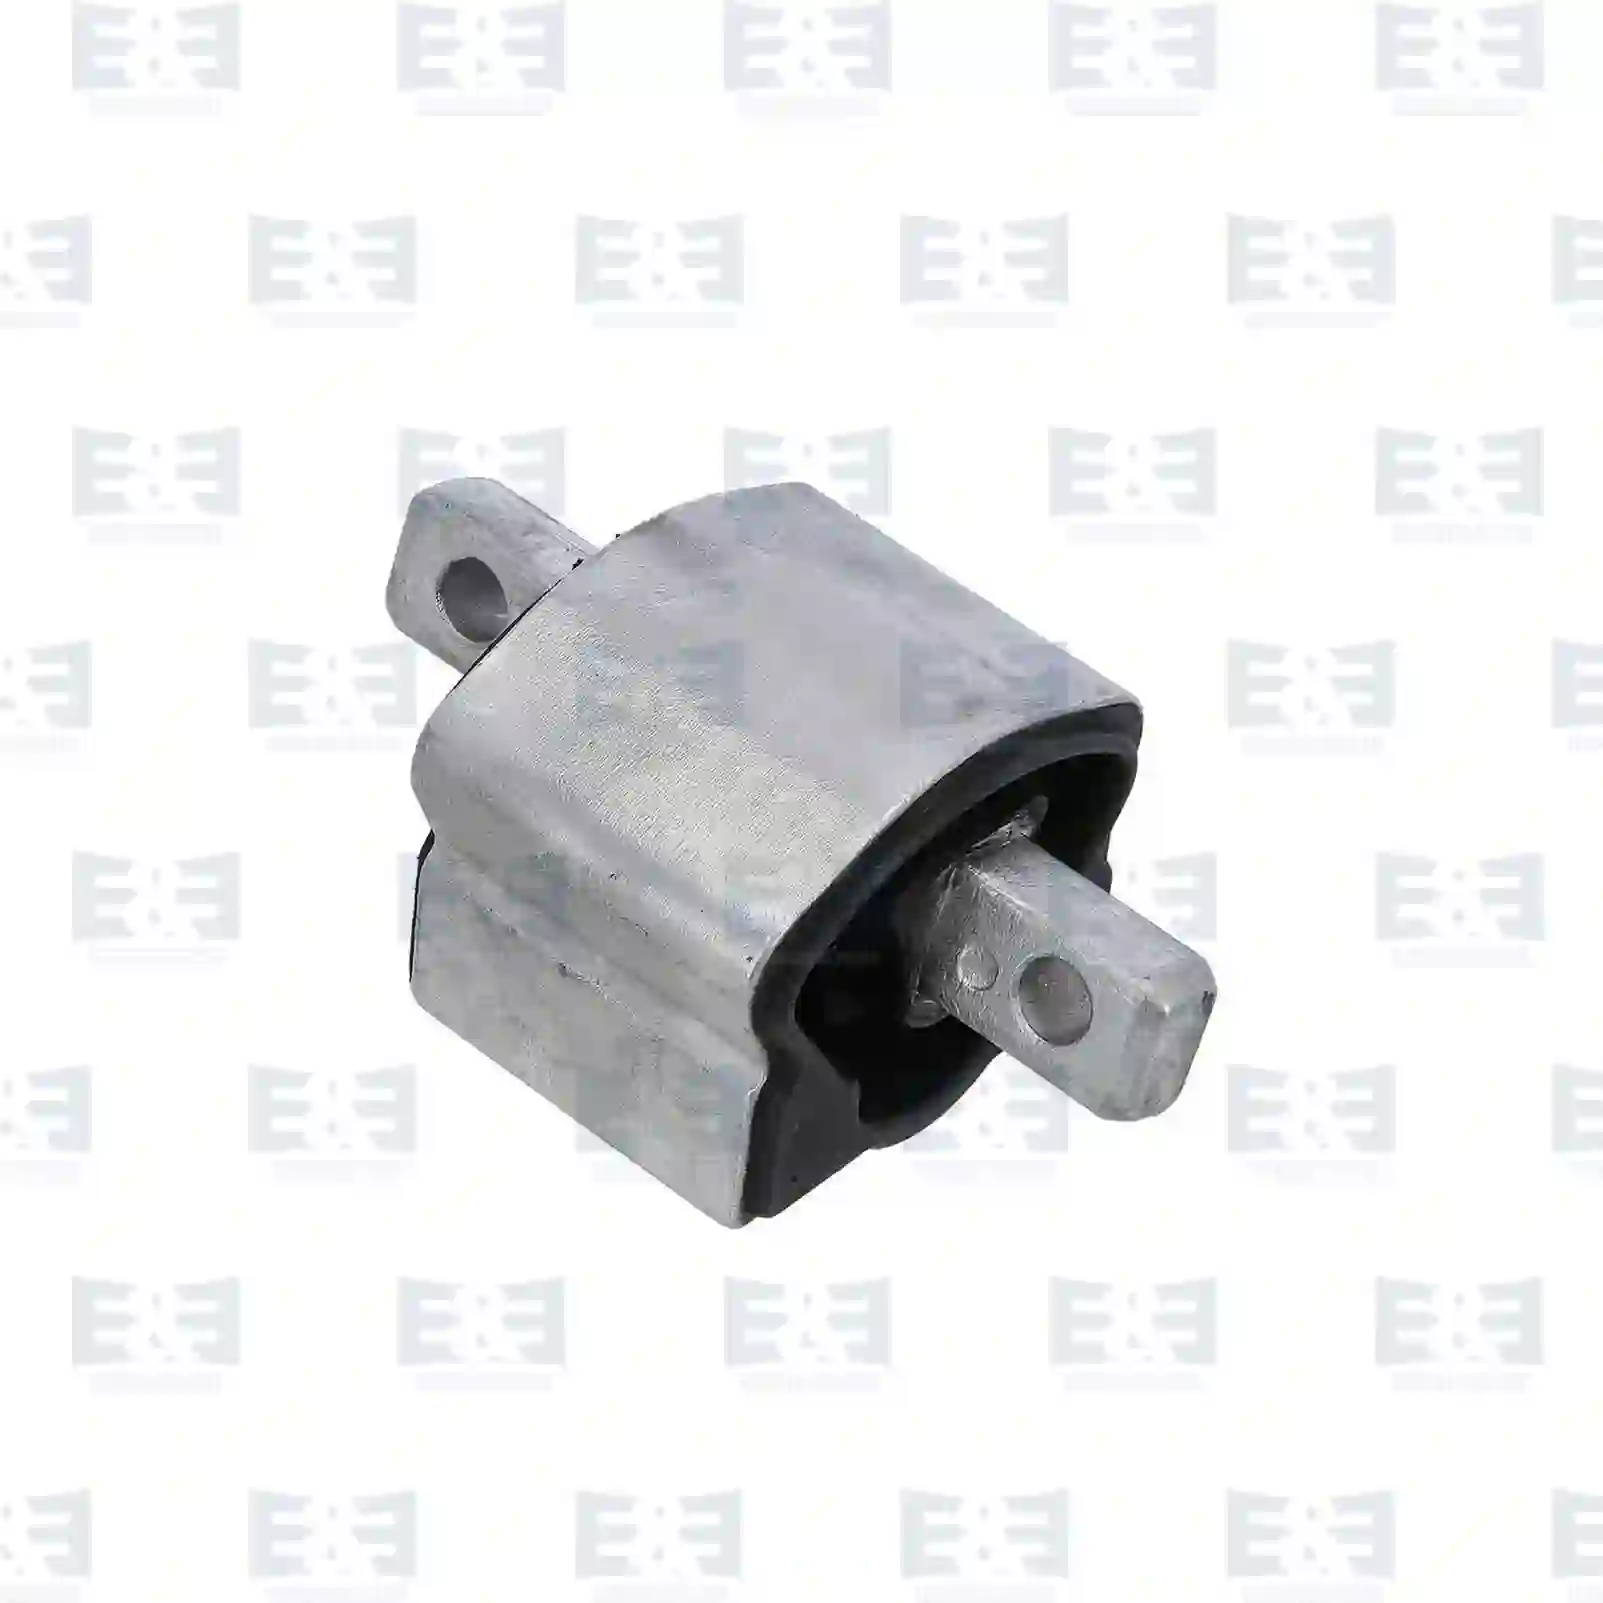 Engine Suspension Mountings Engine mounting, rear, EE No 2E2200760 ,  oem no:1402401118, 1402401218, 1402401318, 1402401718, 1402401818, 1702400018, 2122400318, 2122400418, 2122400618, 2122400818, 2122401018, 2122401618, 2122401718, 2122401818, 2202400118, 2202400218, 2202400418, 2202400518, 2202400718, 2202401818 E&E Truck Spare Parts | Truck Spare Parts, Auotomotive Spare Parts